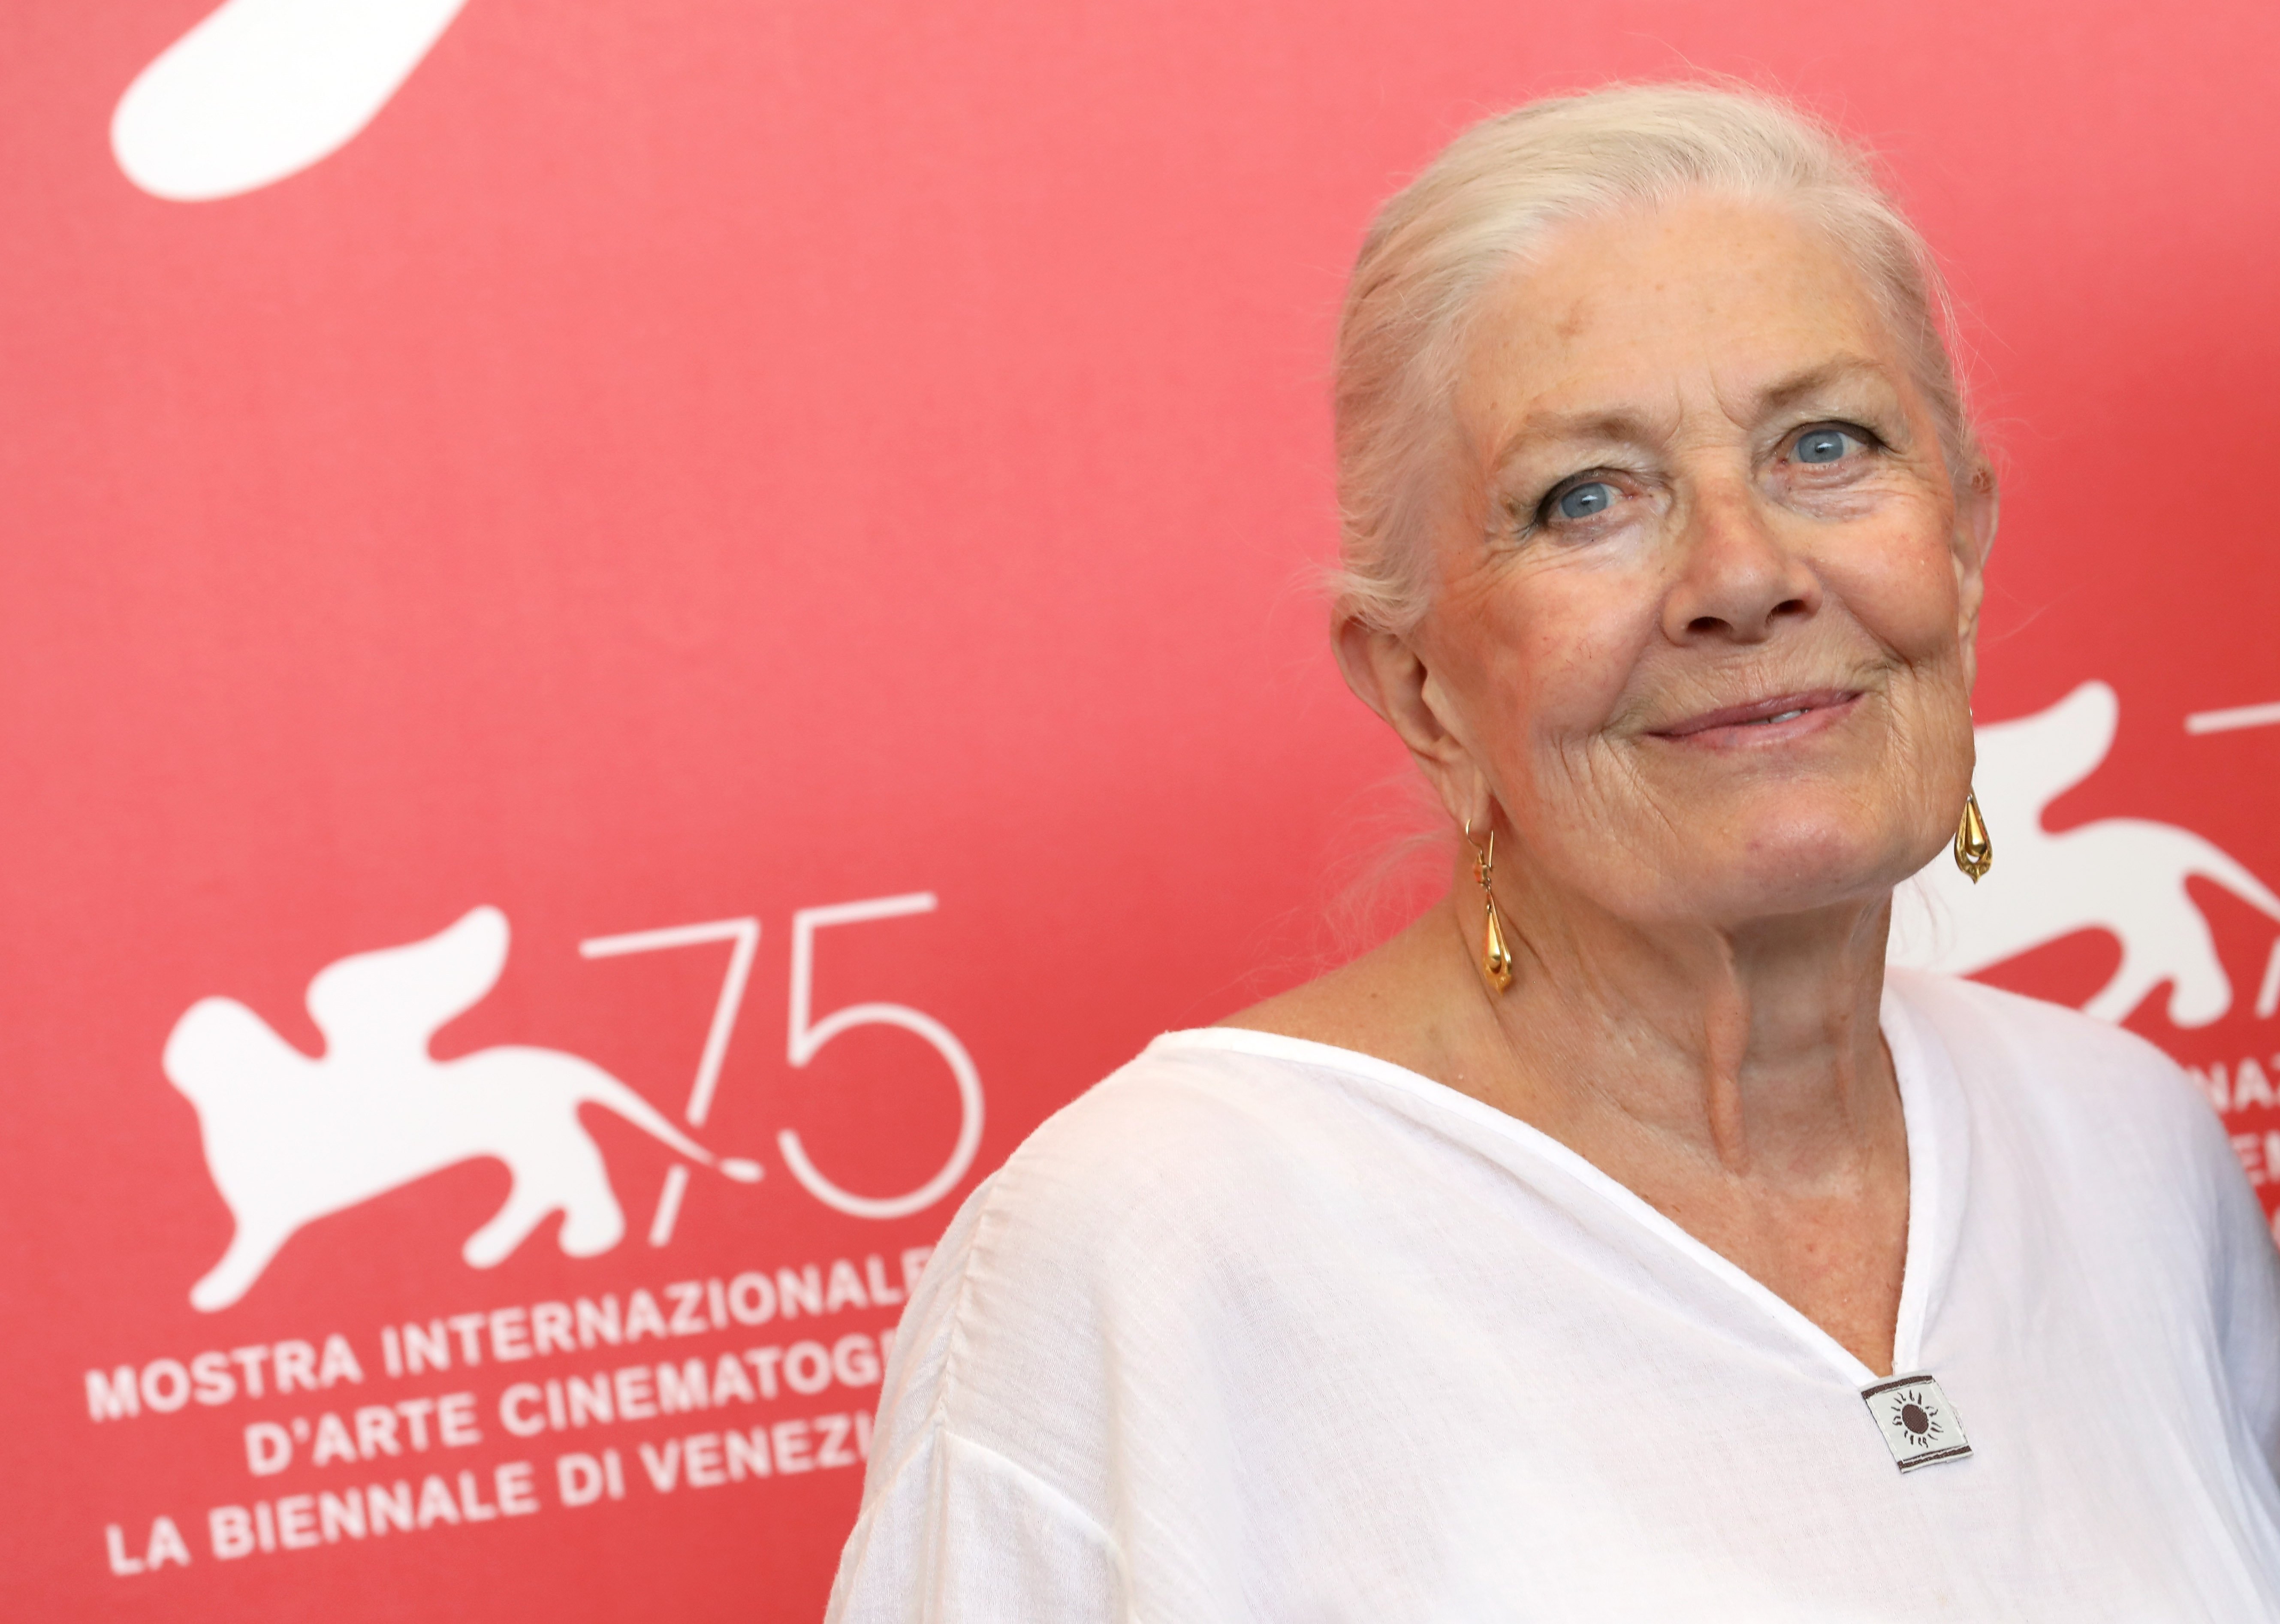 Vanessa Redgrave, in white, at an event in 2018